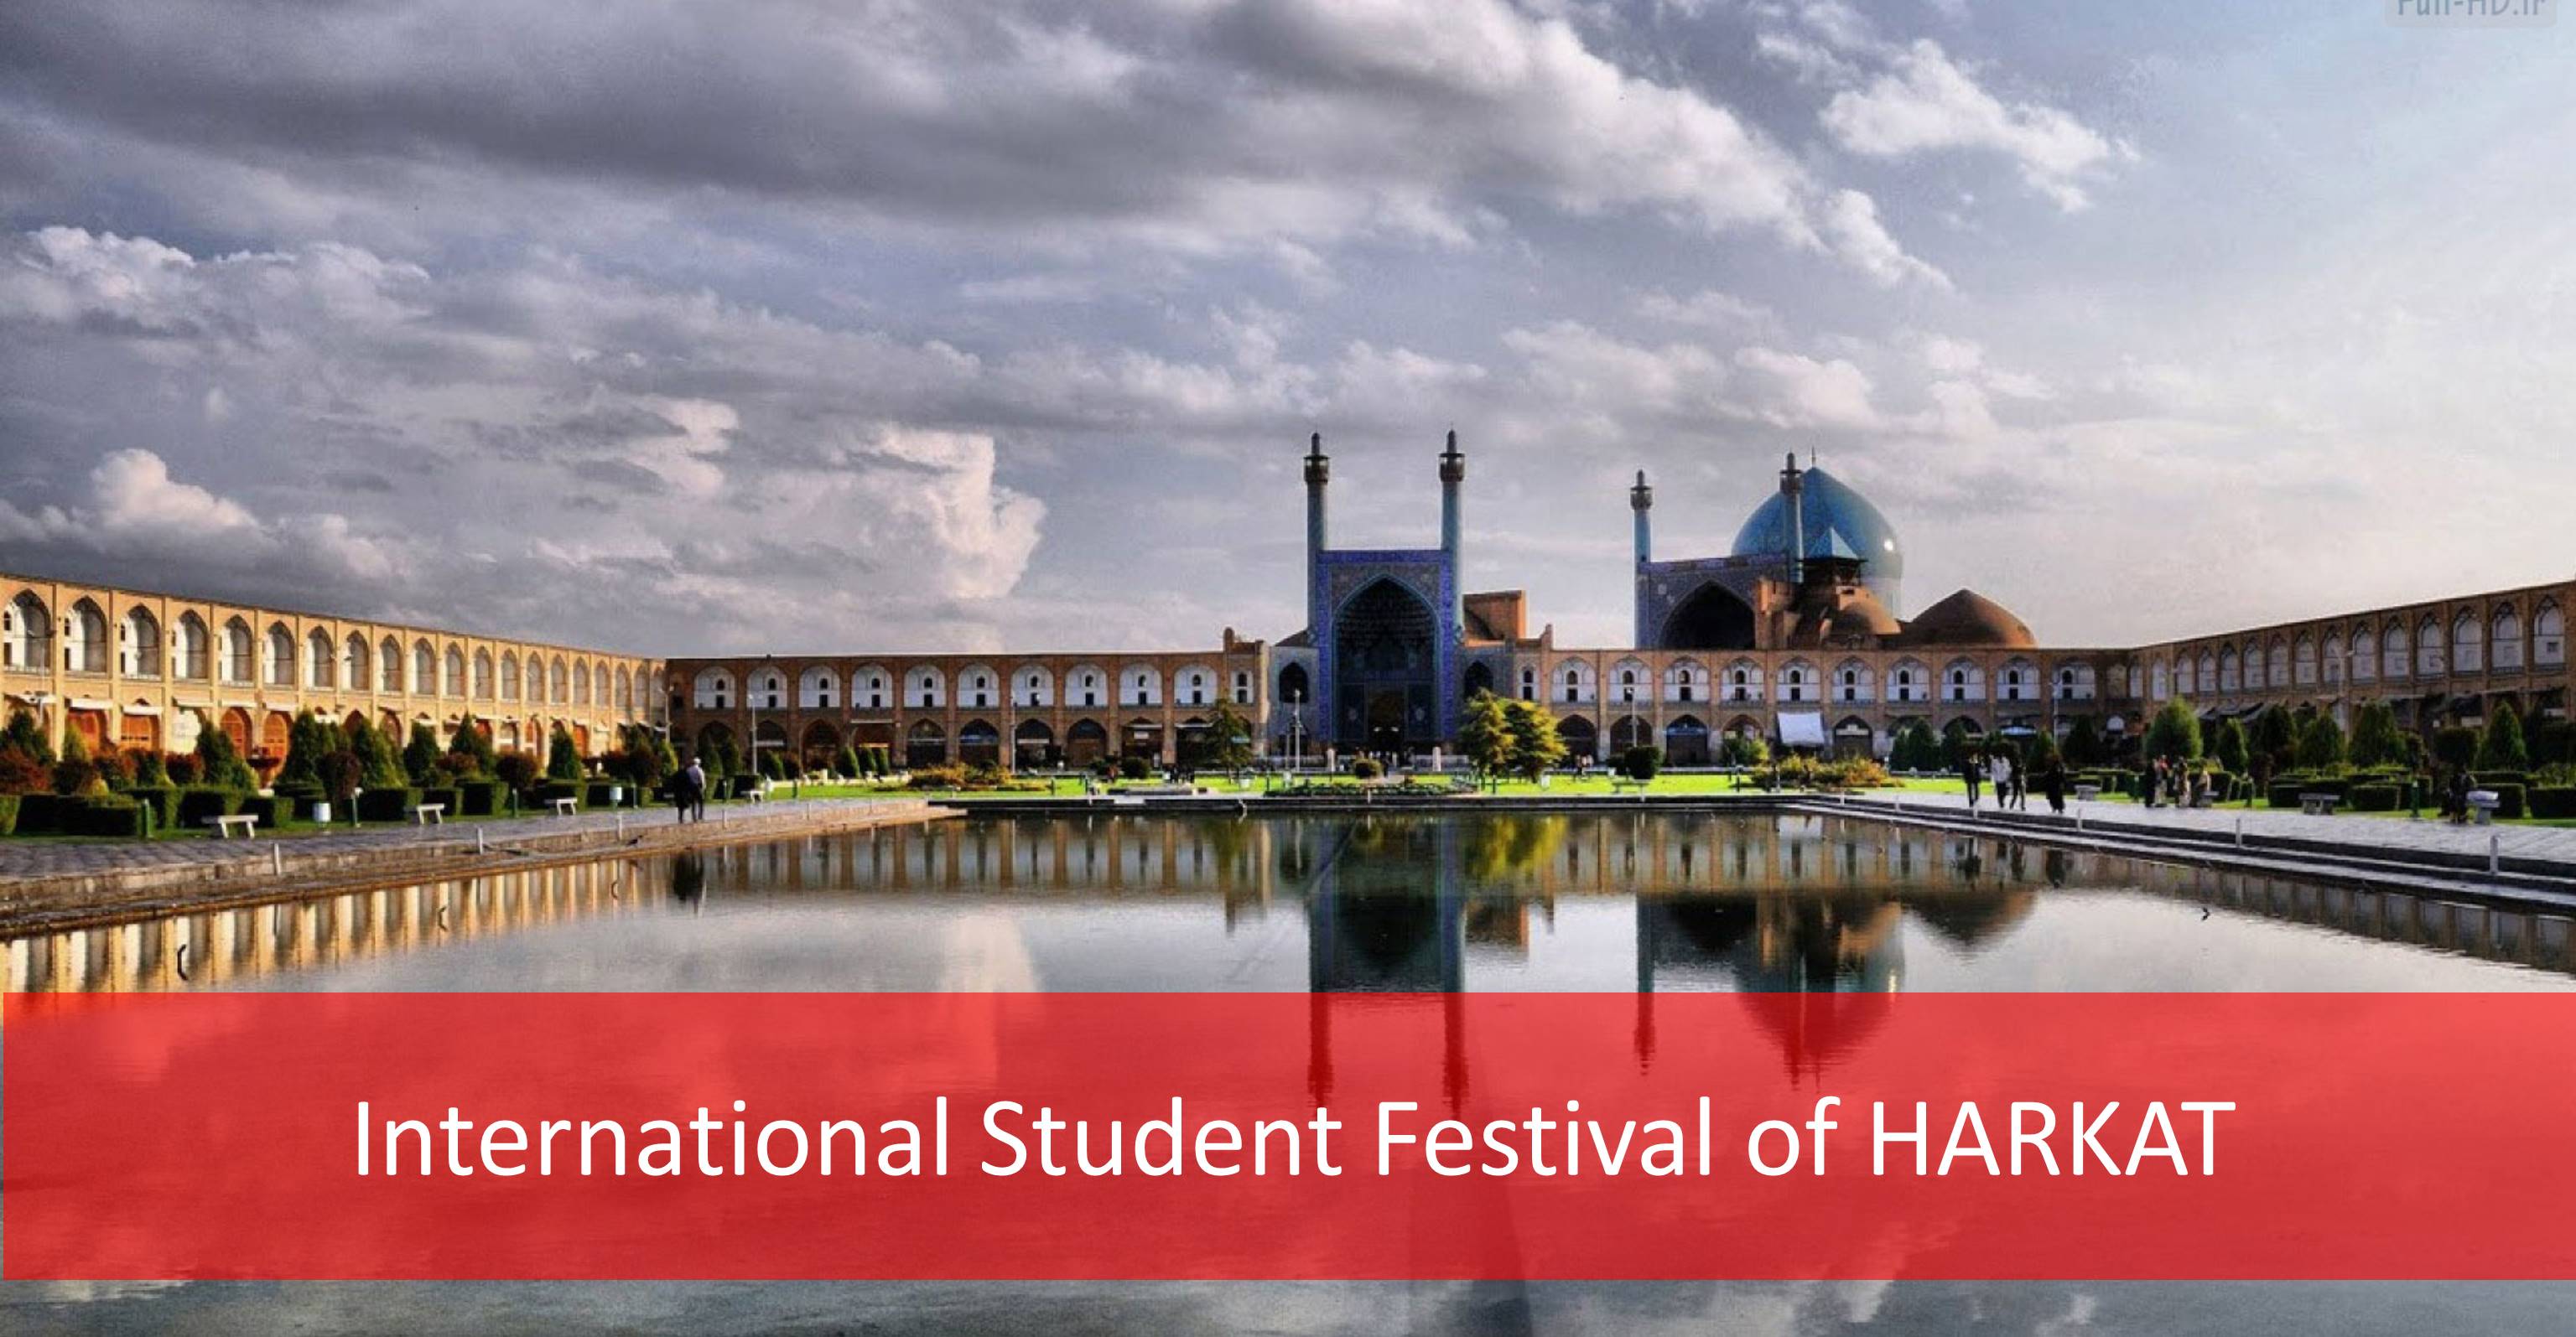 International Student Festival of HARKAT, Iran for Students Worldwide 2018 (Fully-funded)